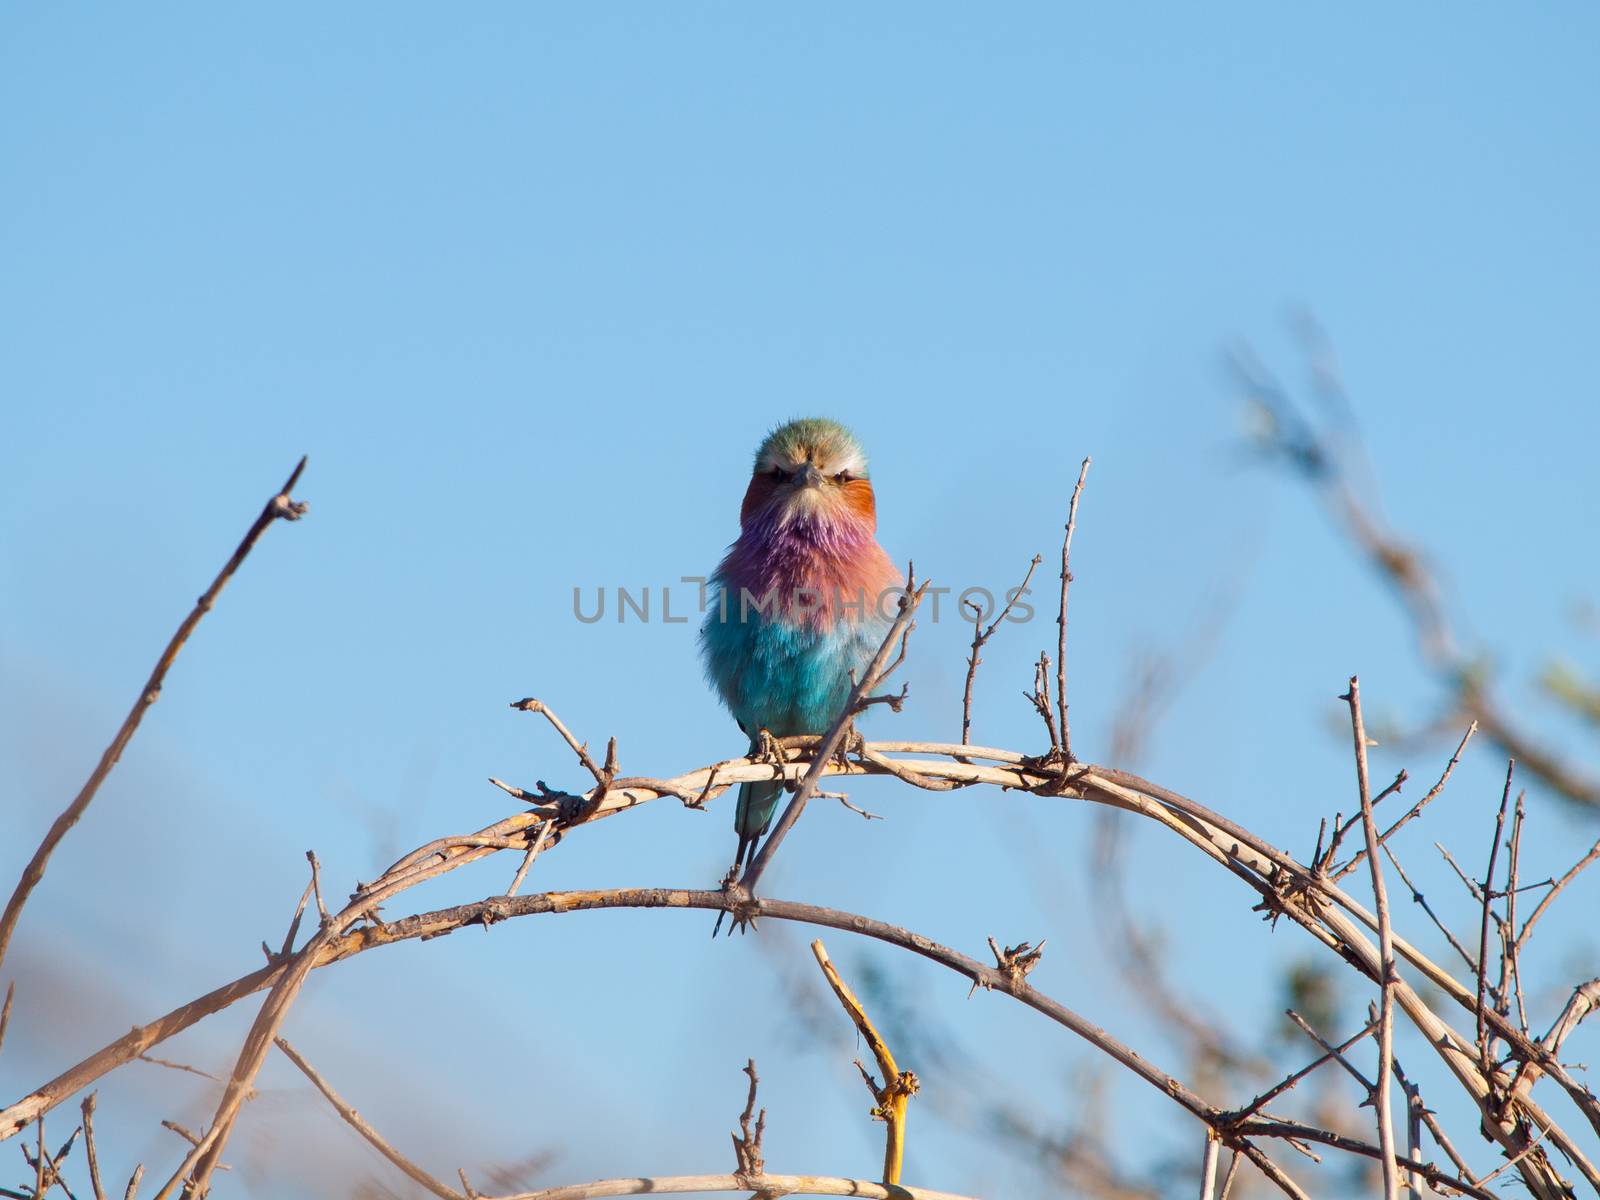 Lilac-breasted Roller (Coracias Caudatus) by pyty